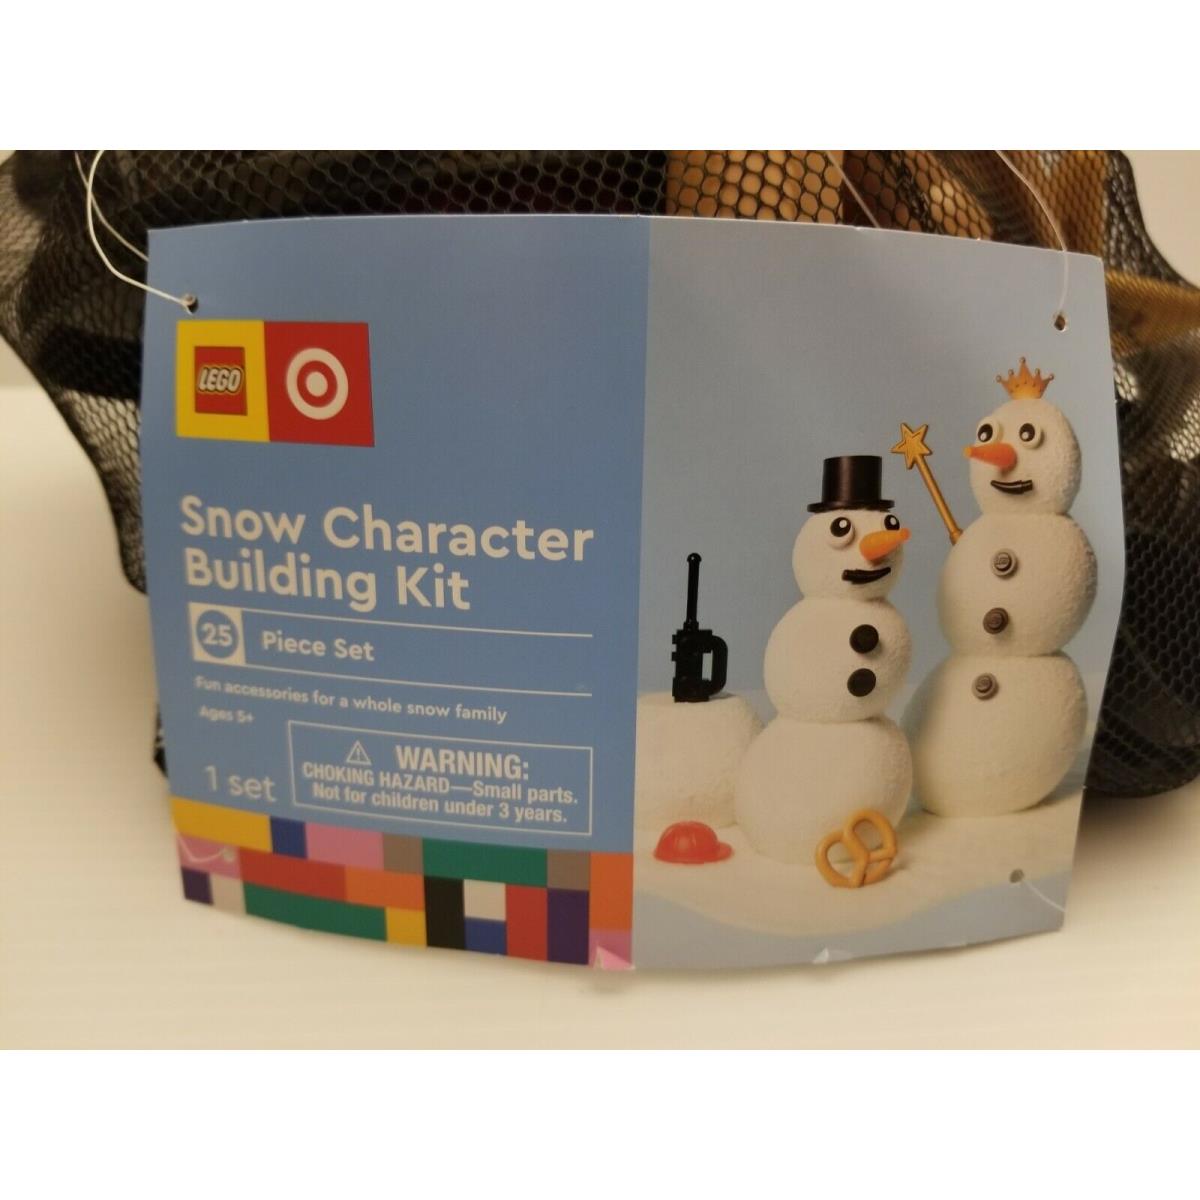 Lego x Target Exclusive Snow Character Building Kit Life Size